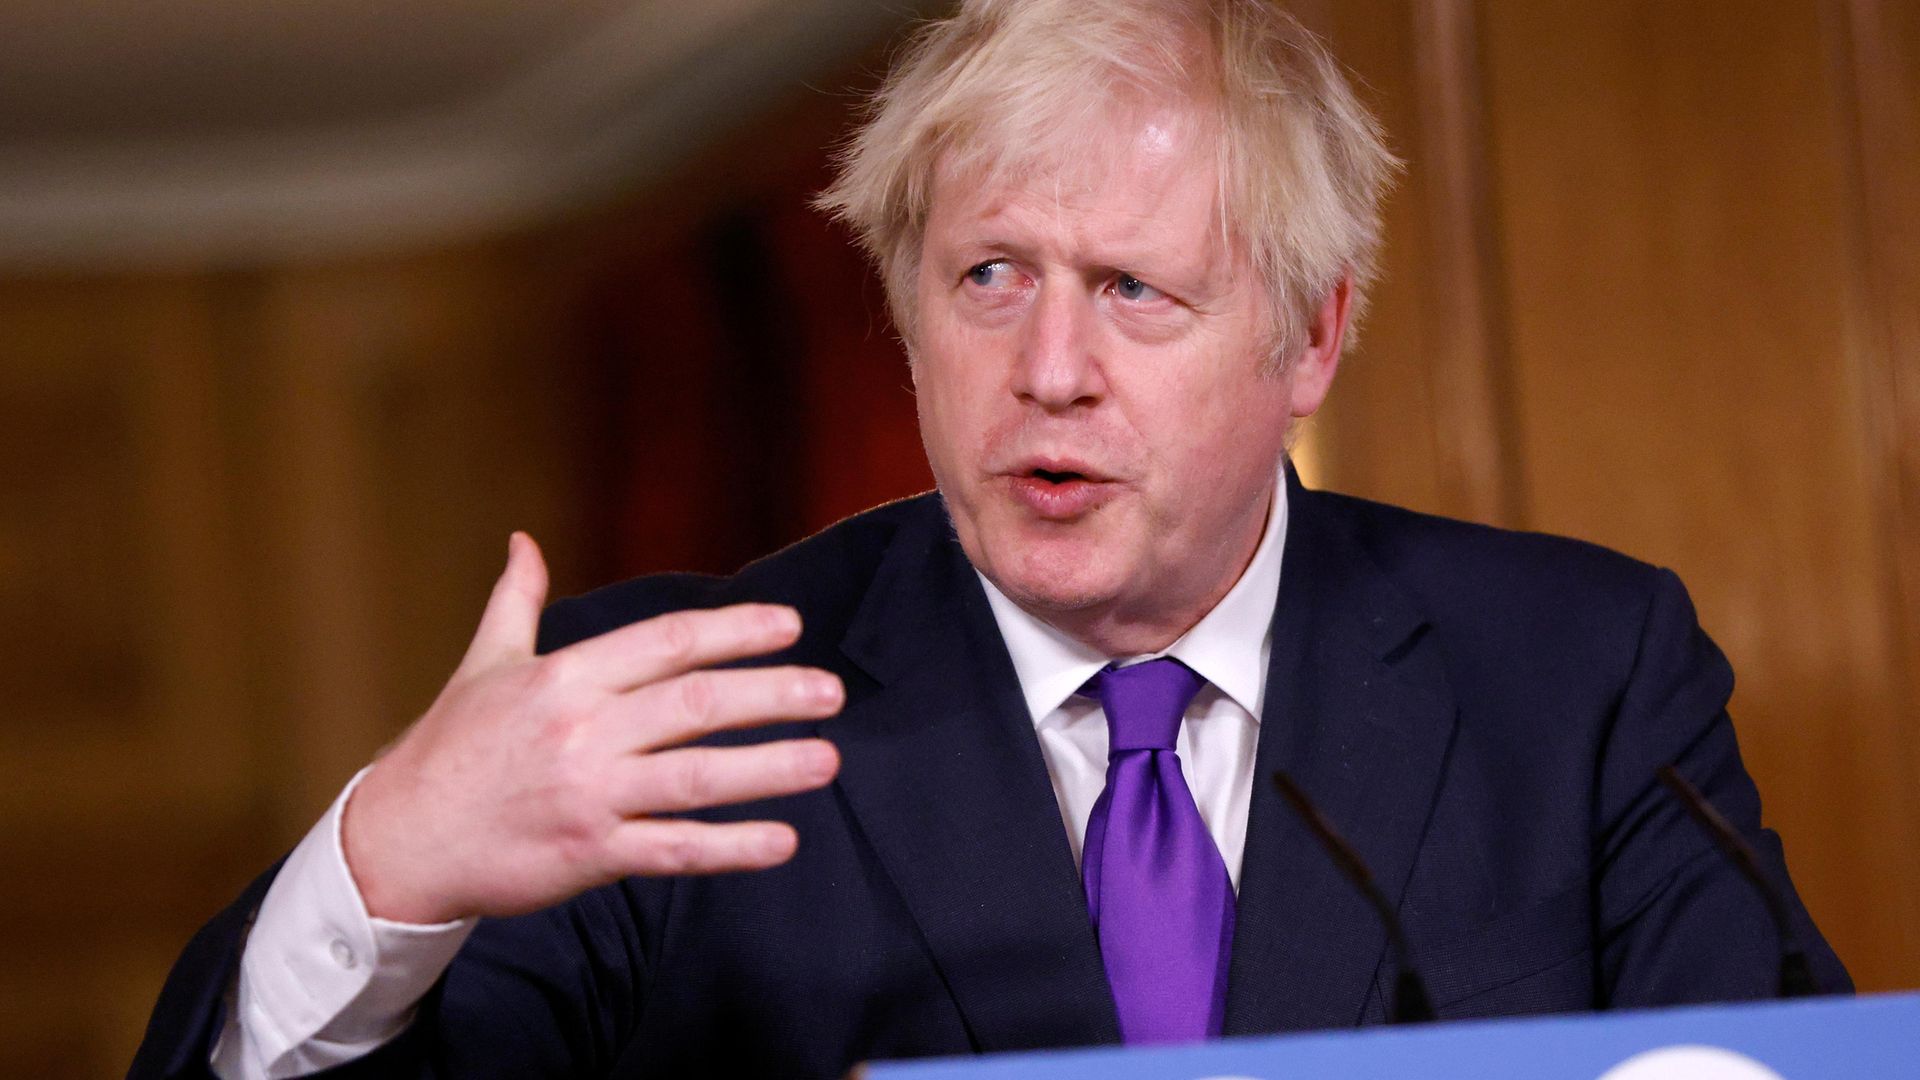 Prime Minister Boris Johnson during a media briefing on coronavirus (COVID-19) in Downing Street, London. - Credit: PA